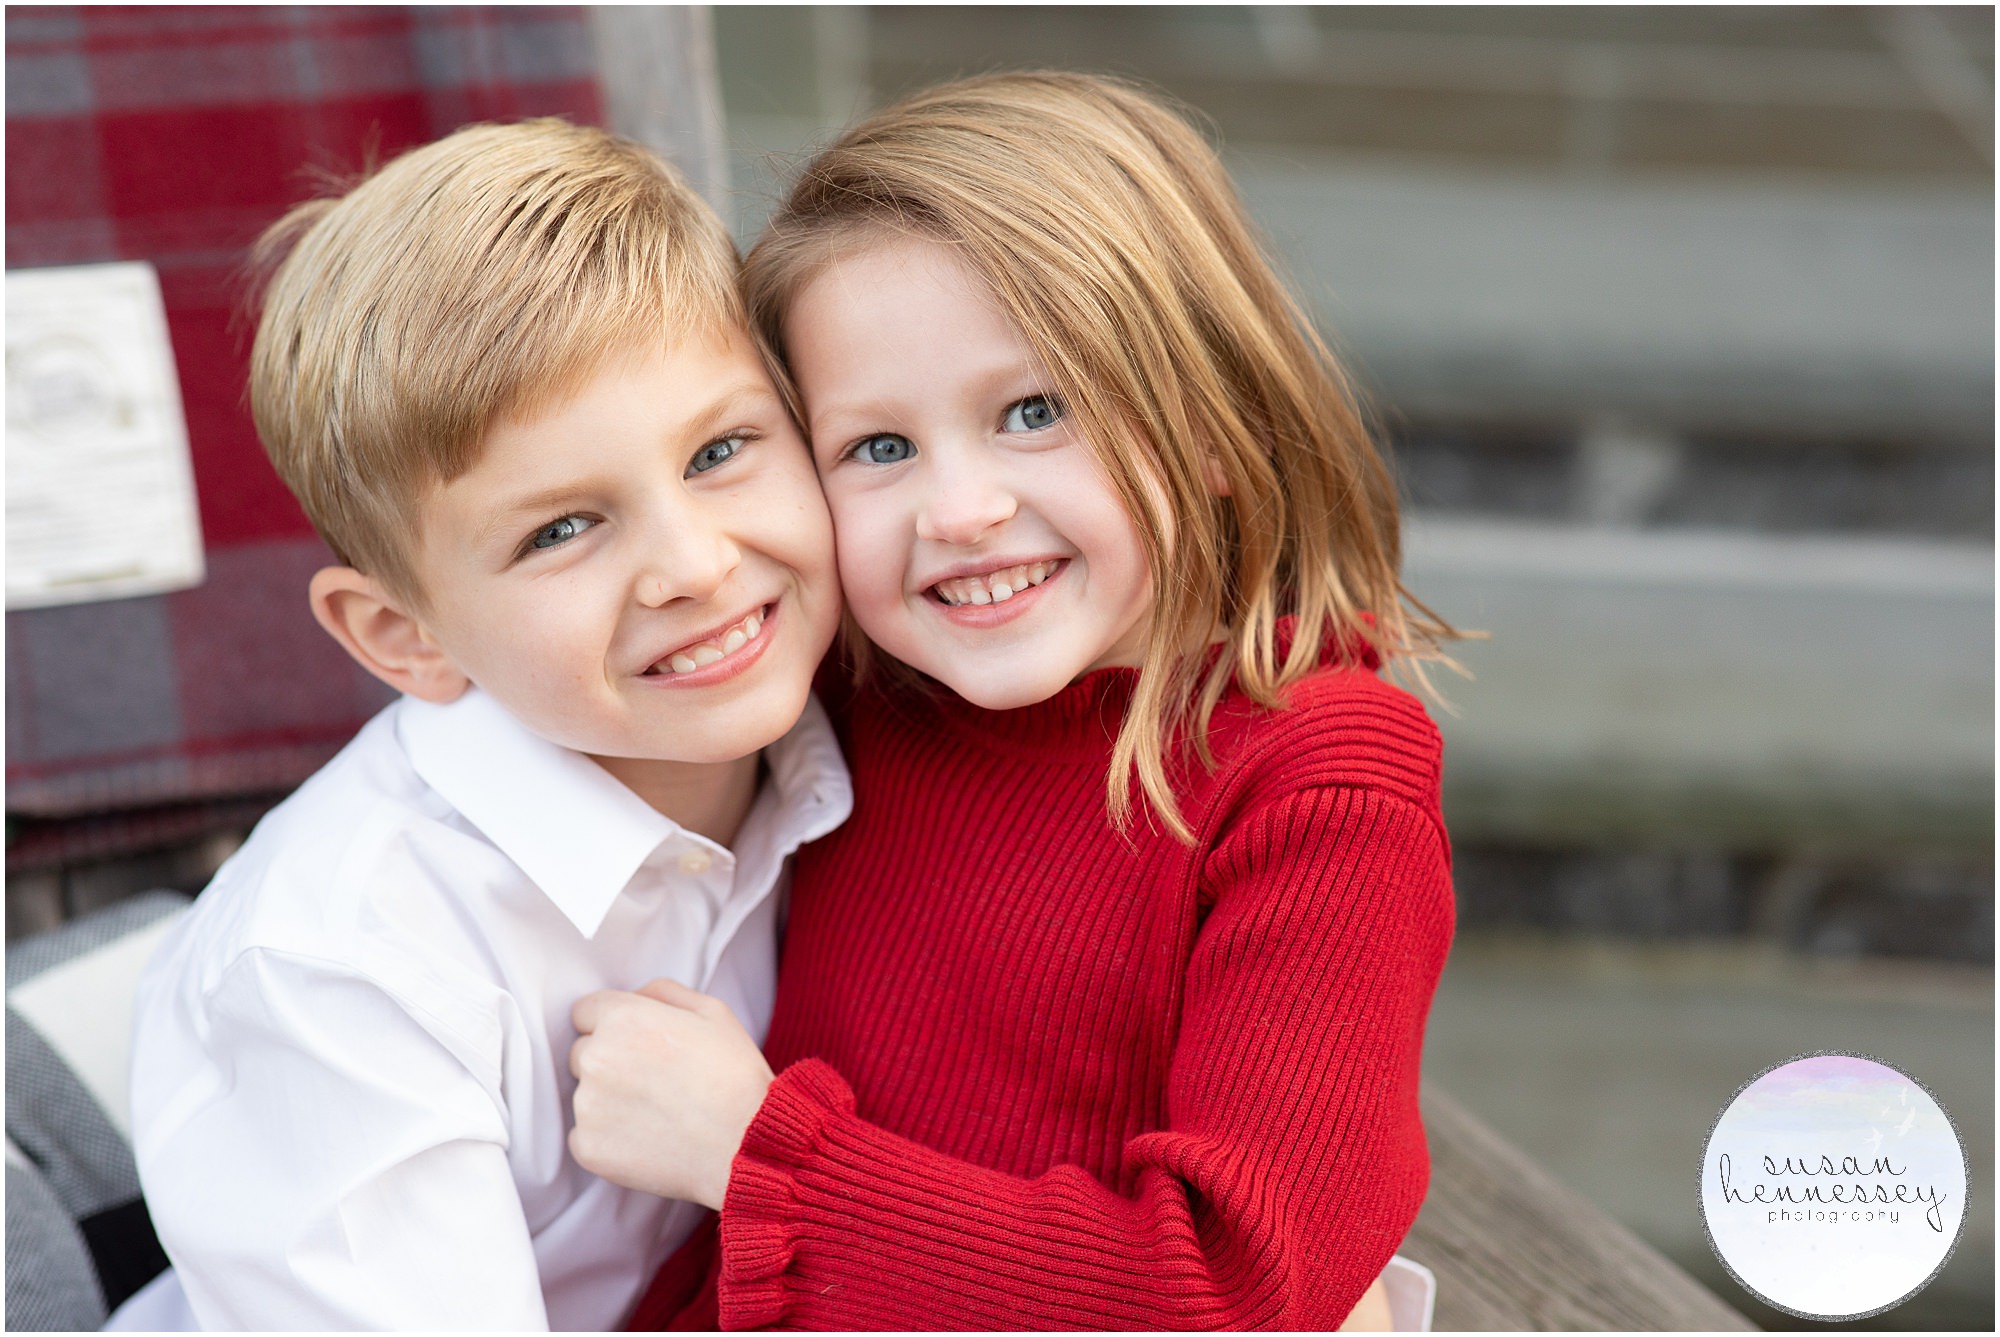 Susan Hennessey Photography based in Moorestown photographs yearly South Jersey holiday family photo sessions